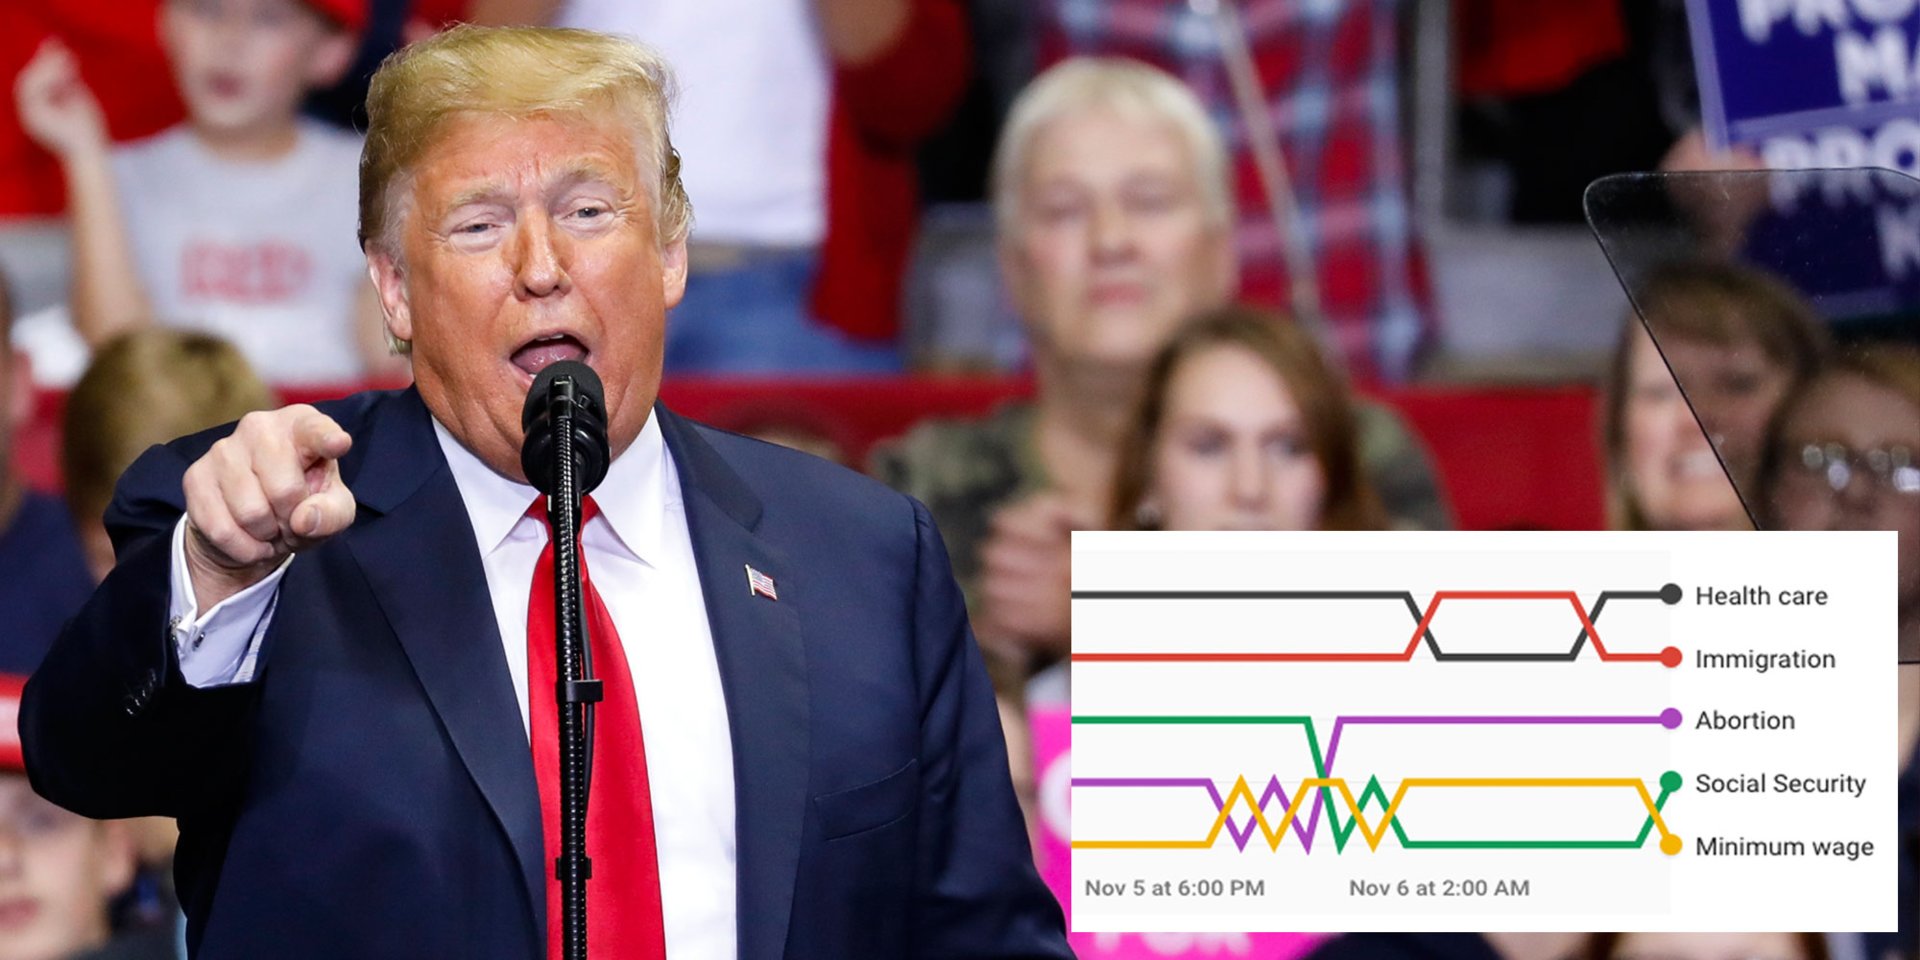 Google data shows the 5 issues dominating voter searches, and it could mean Trump's message is failing